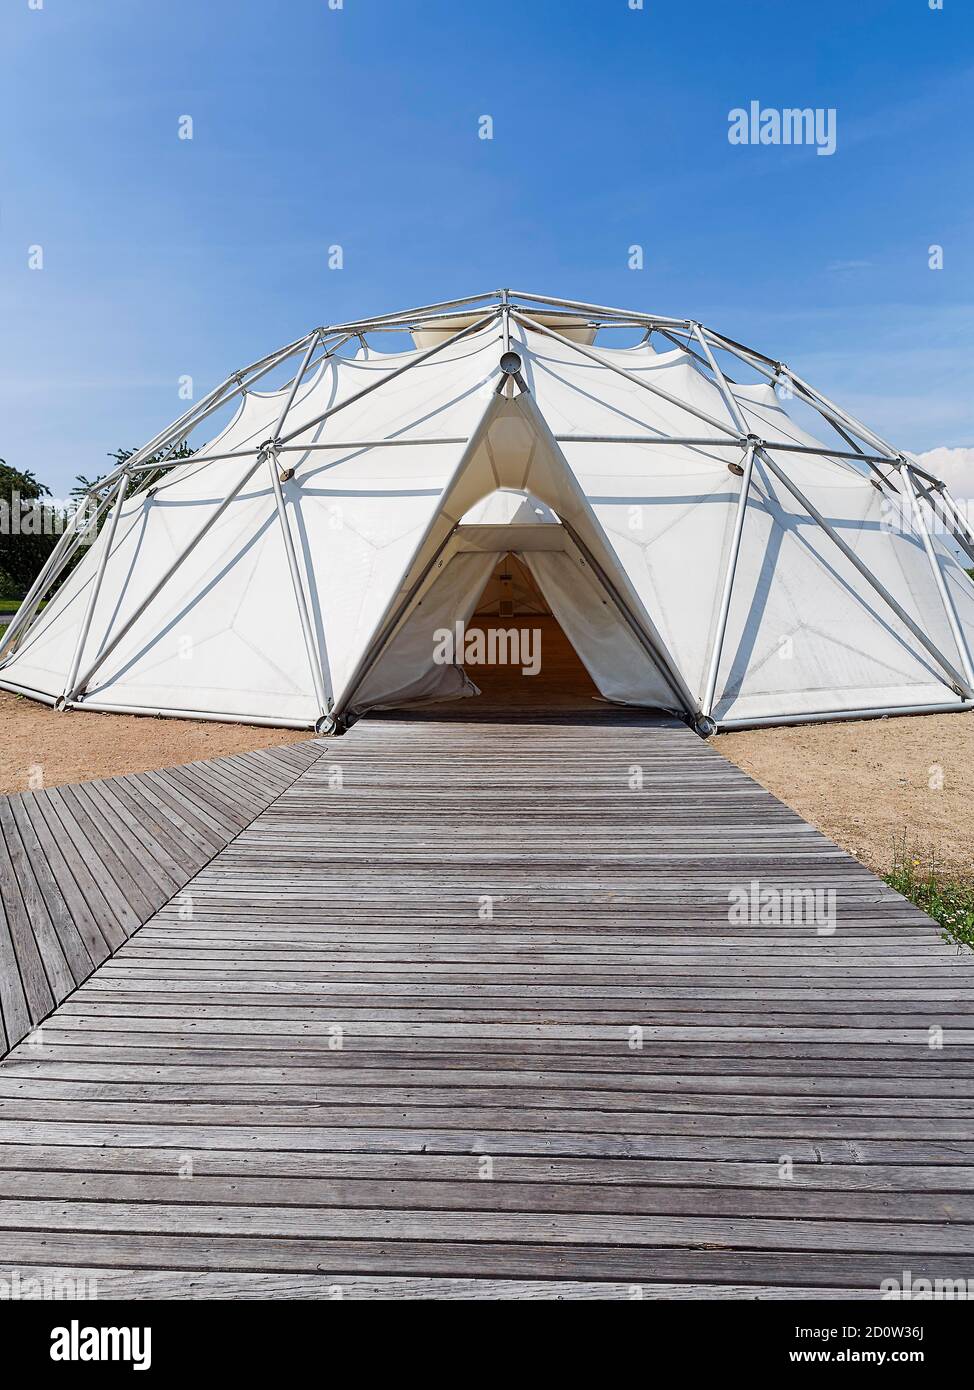 Geodesic dome, tent with wooden walkway, event room, exhibition room Dome, architect Richard Buckminster Fuller, Vitra Campus, Vitra Design Museum, We Stock Photo